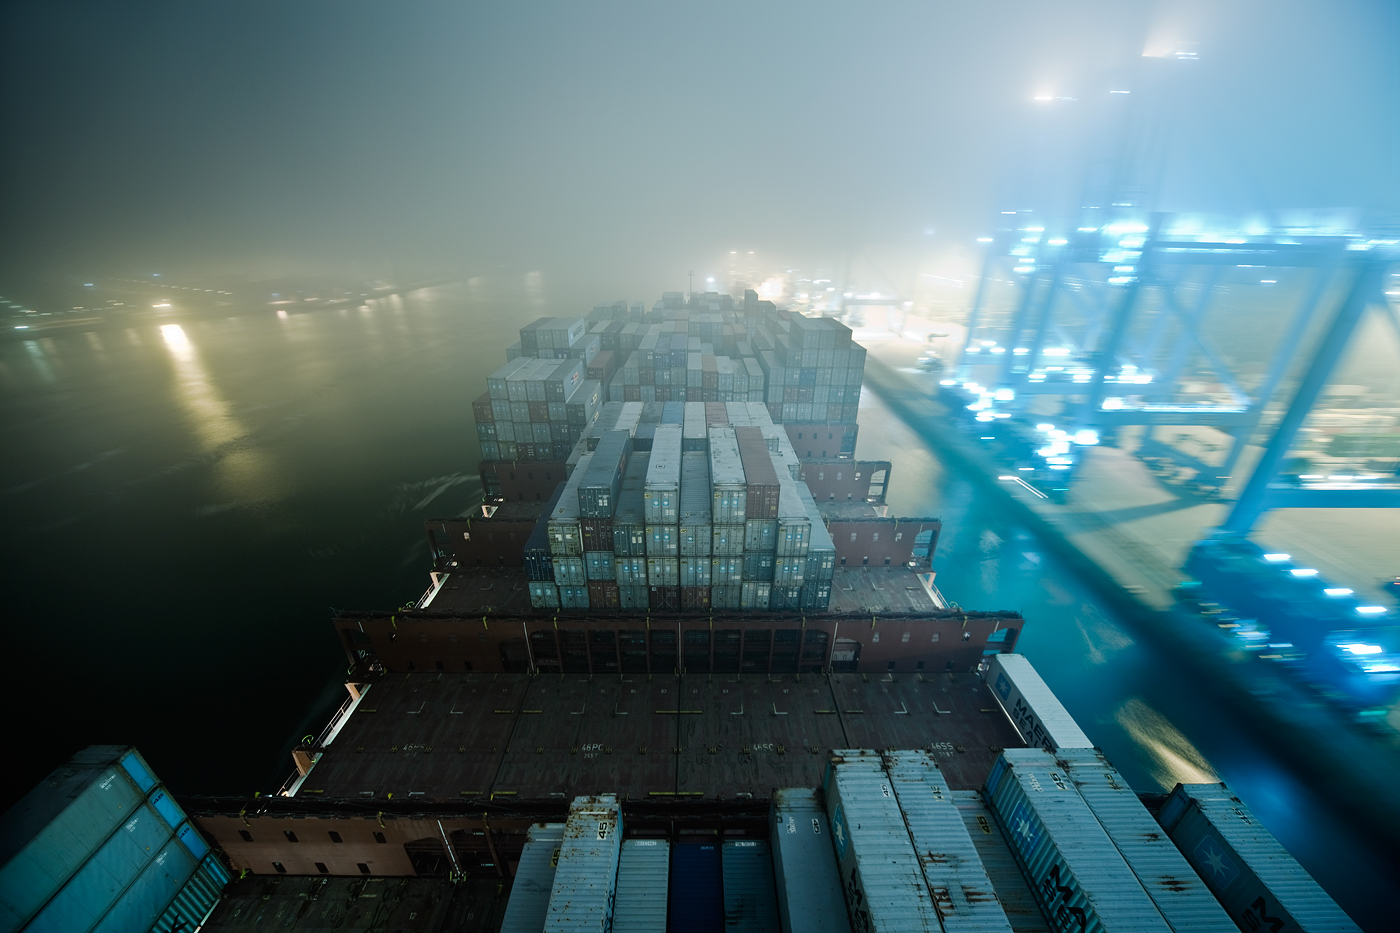 Container ship Rotterdam Port of Felixstowe Netherlands English Channel container shipping world's largest containership port habor mist fog logistic globalisation North Sea